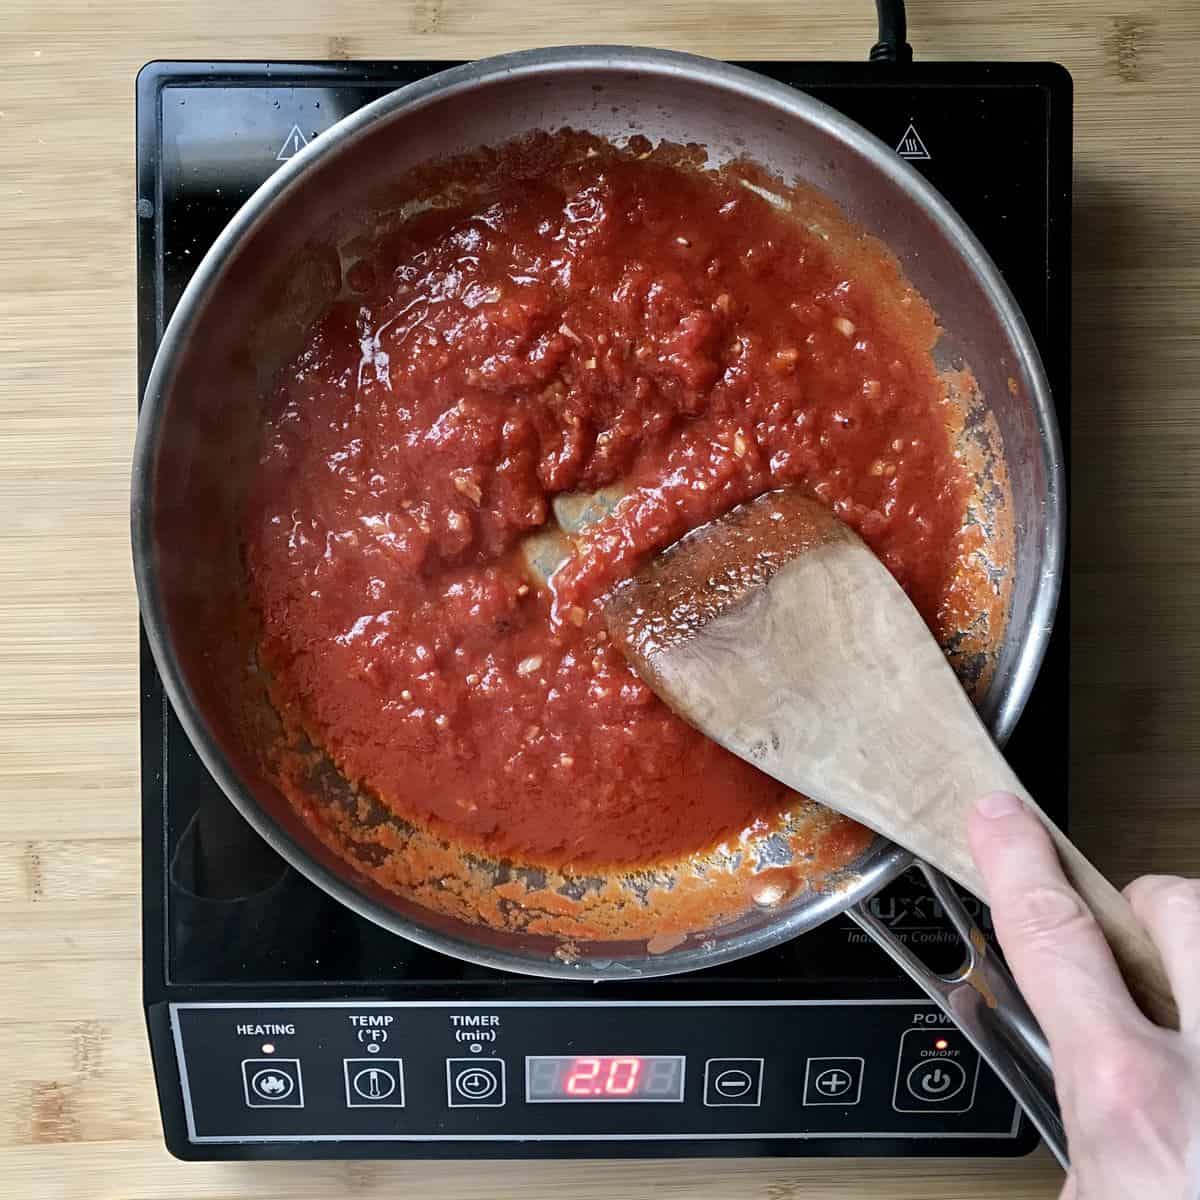 Canned tomatoes simmering in a saucepan.